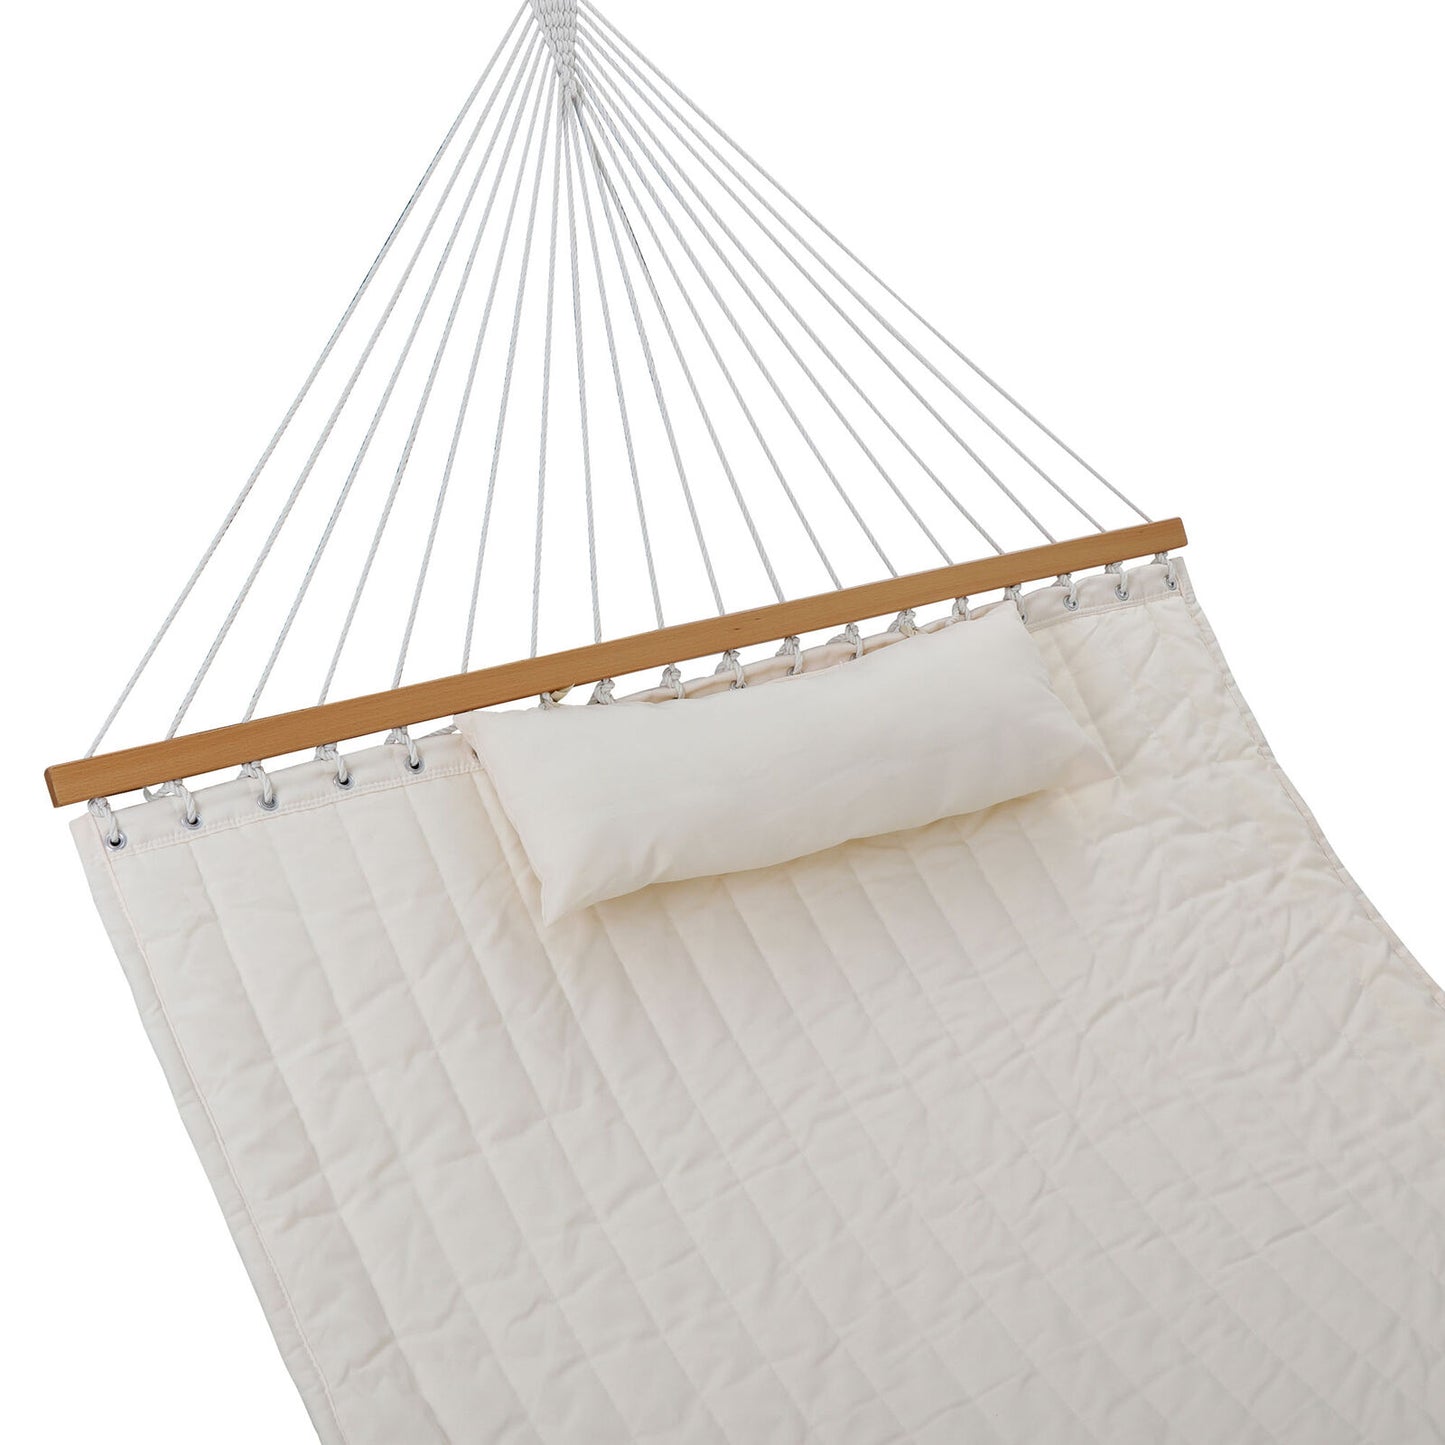 Double Hammock Quilted Fabric Sleeping Bed Swing Hang W/ Pillow 2 Person White